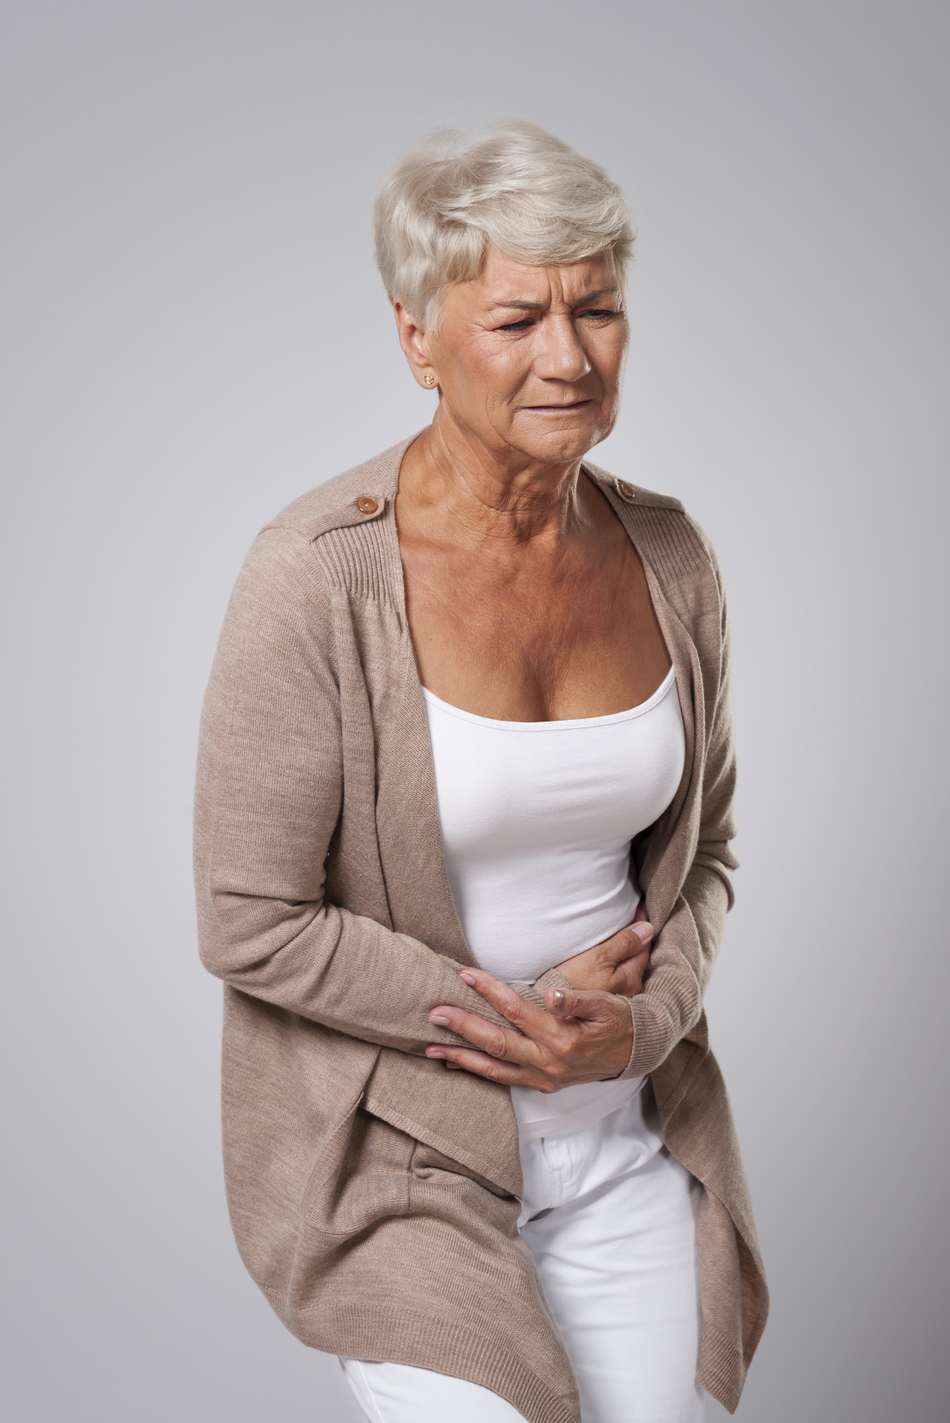 An ER Doctor's Diagnosis: Severe Stomach Pain